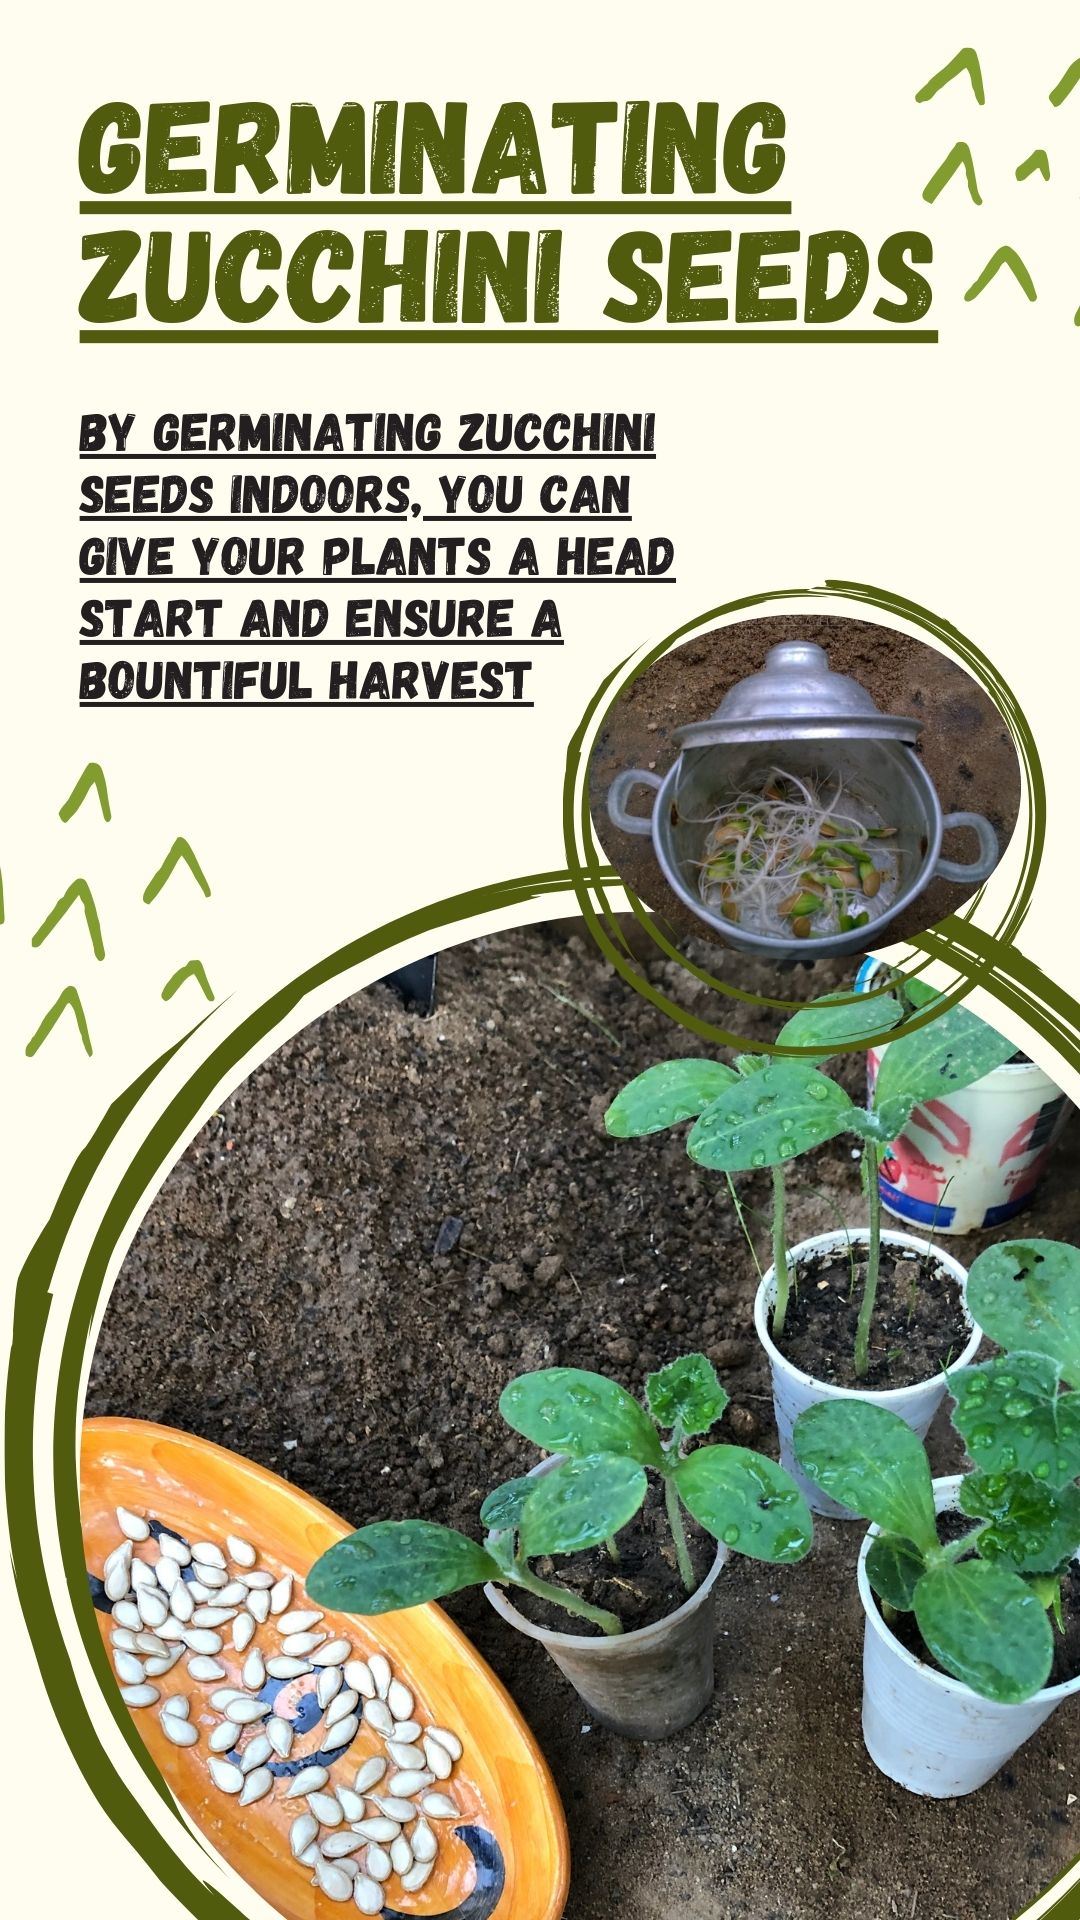 By germinating zucchini seeds indoors, you can give your plants a head start and ensure a bountiful harvest. Read on as we explore the different aspects of germination, caring for the seedlings, and experience the joy of cultivating this versatile and delicious vegetable indoors.